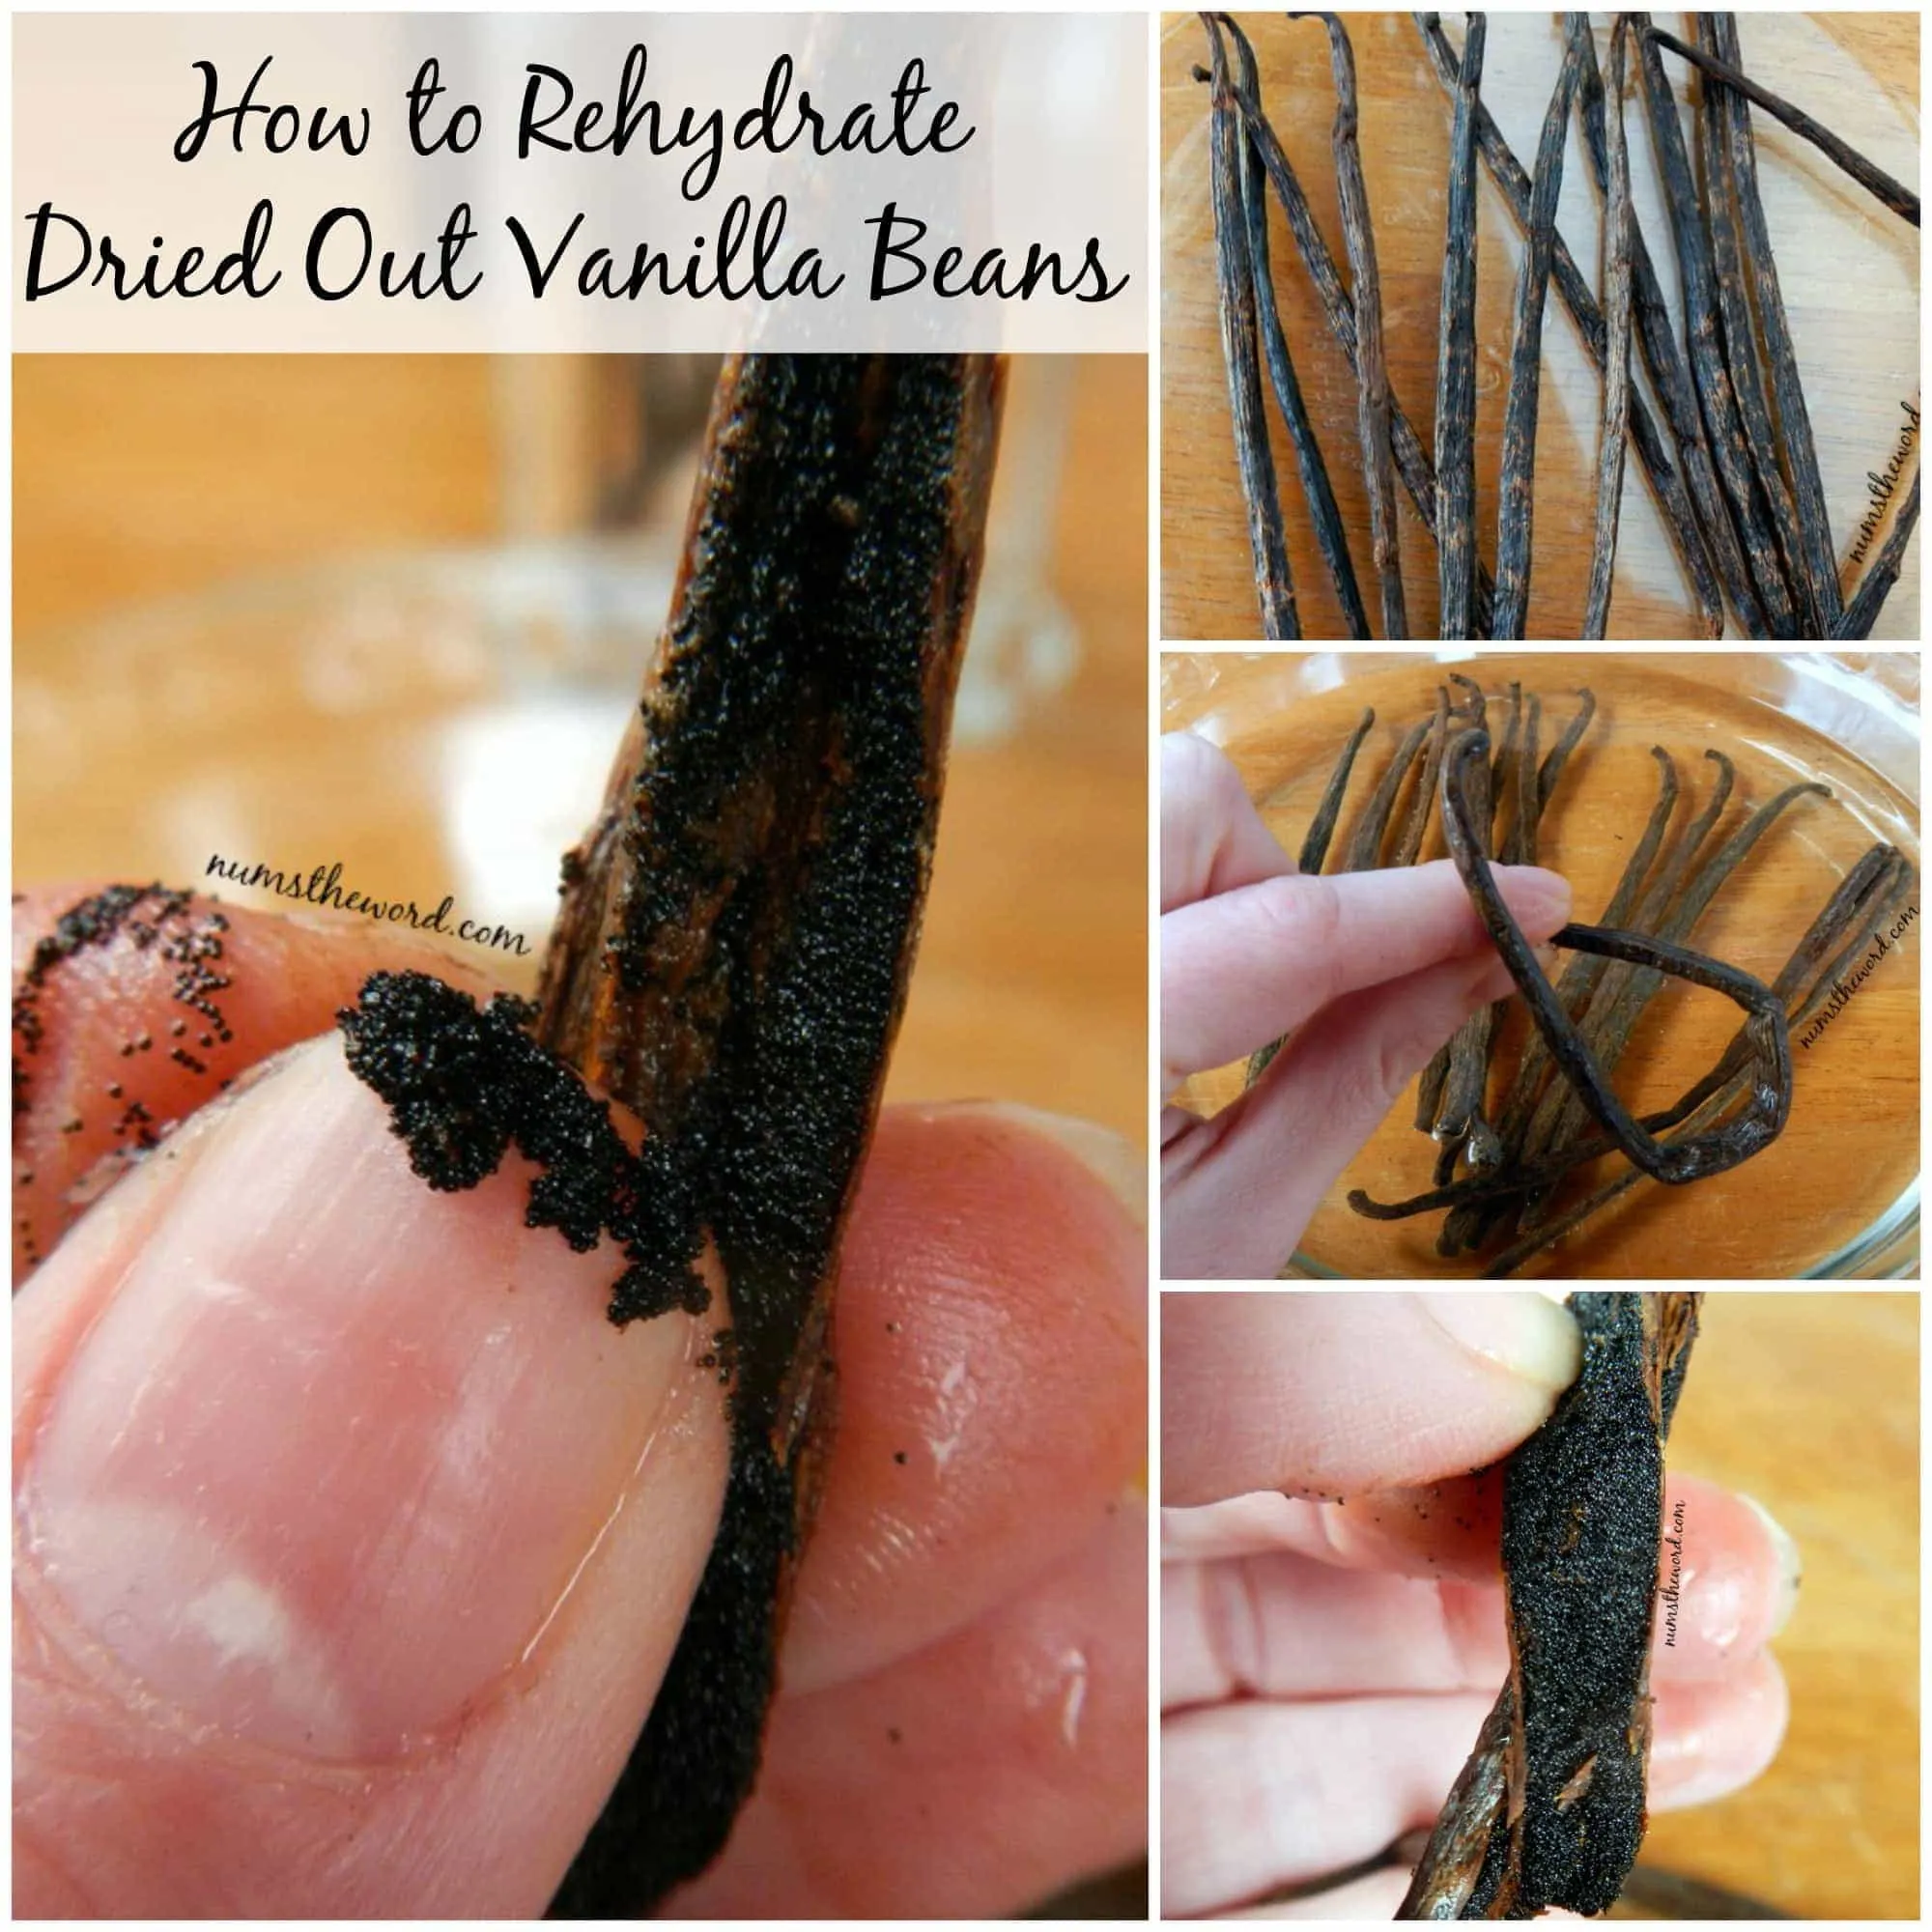 How to Rehydrate Dried Out Vanilla Beans